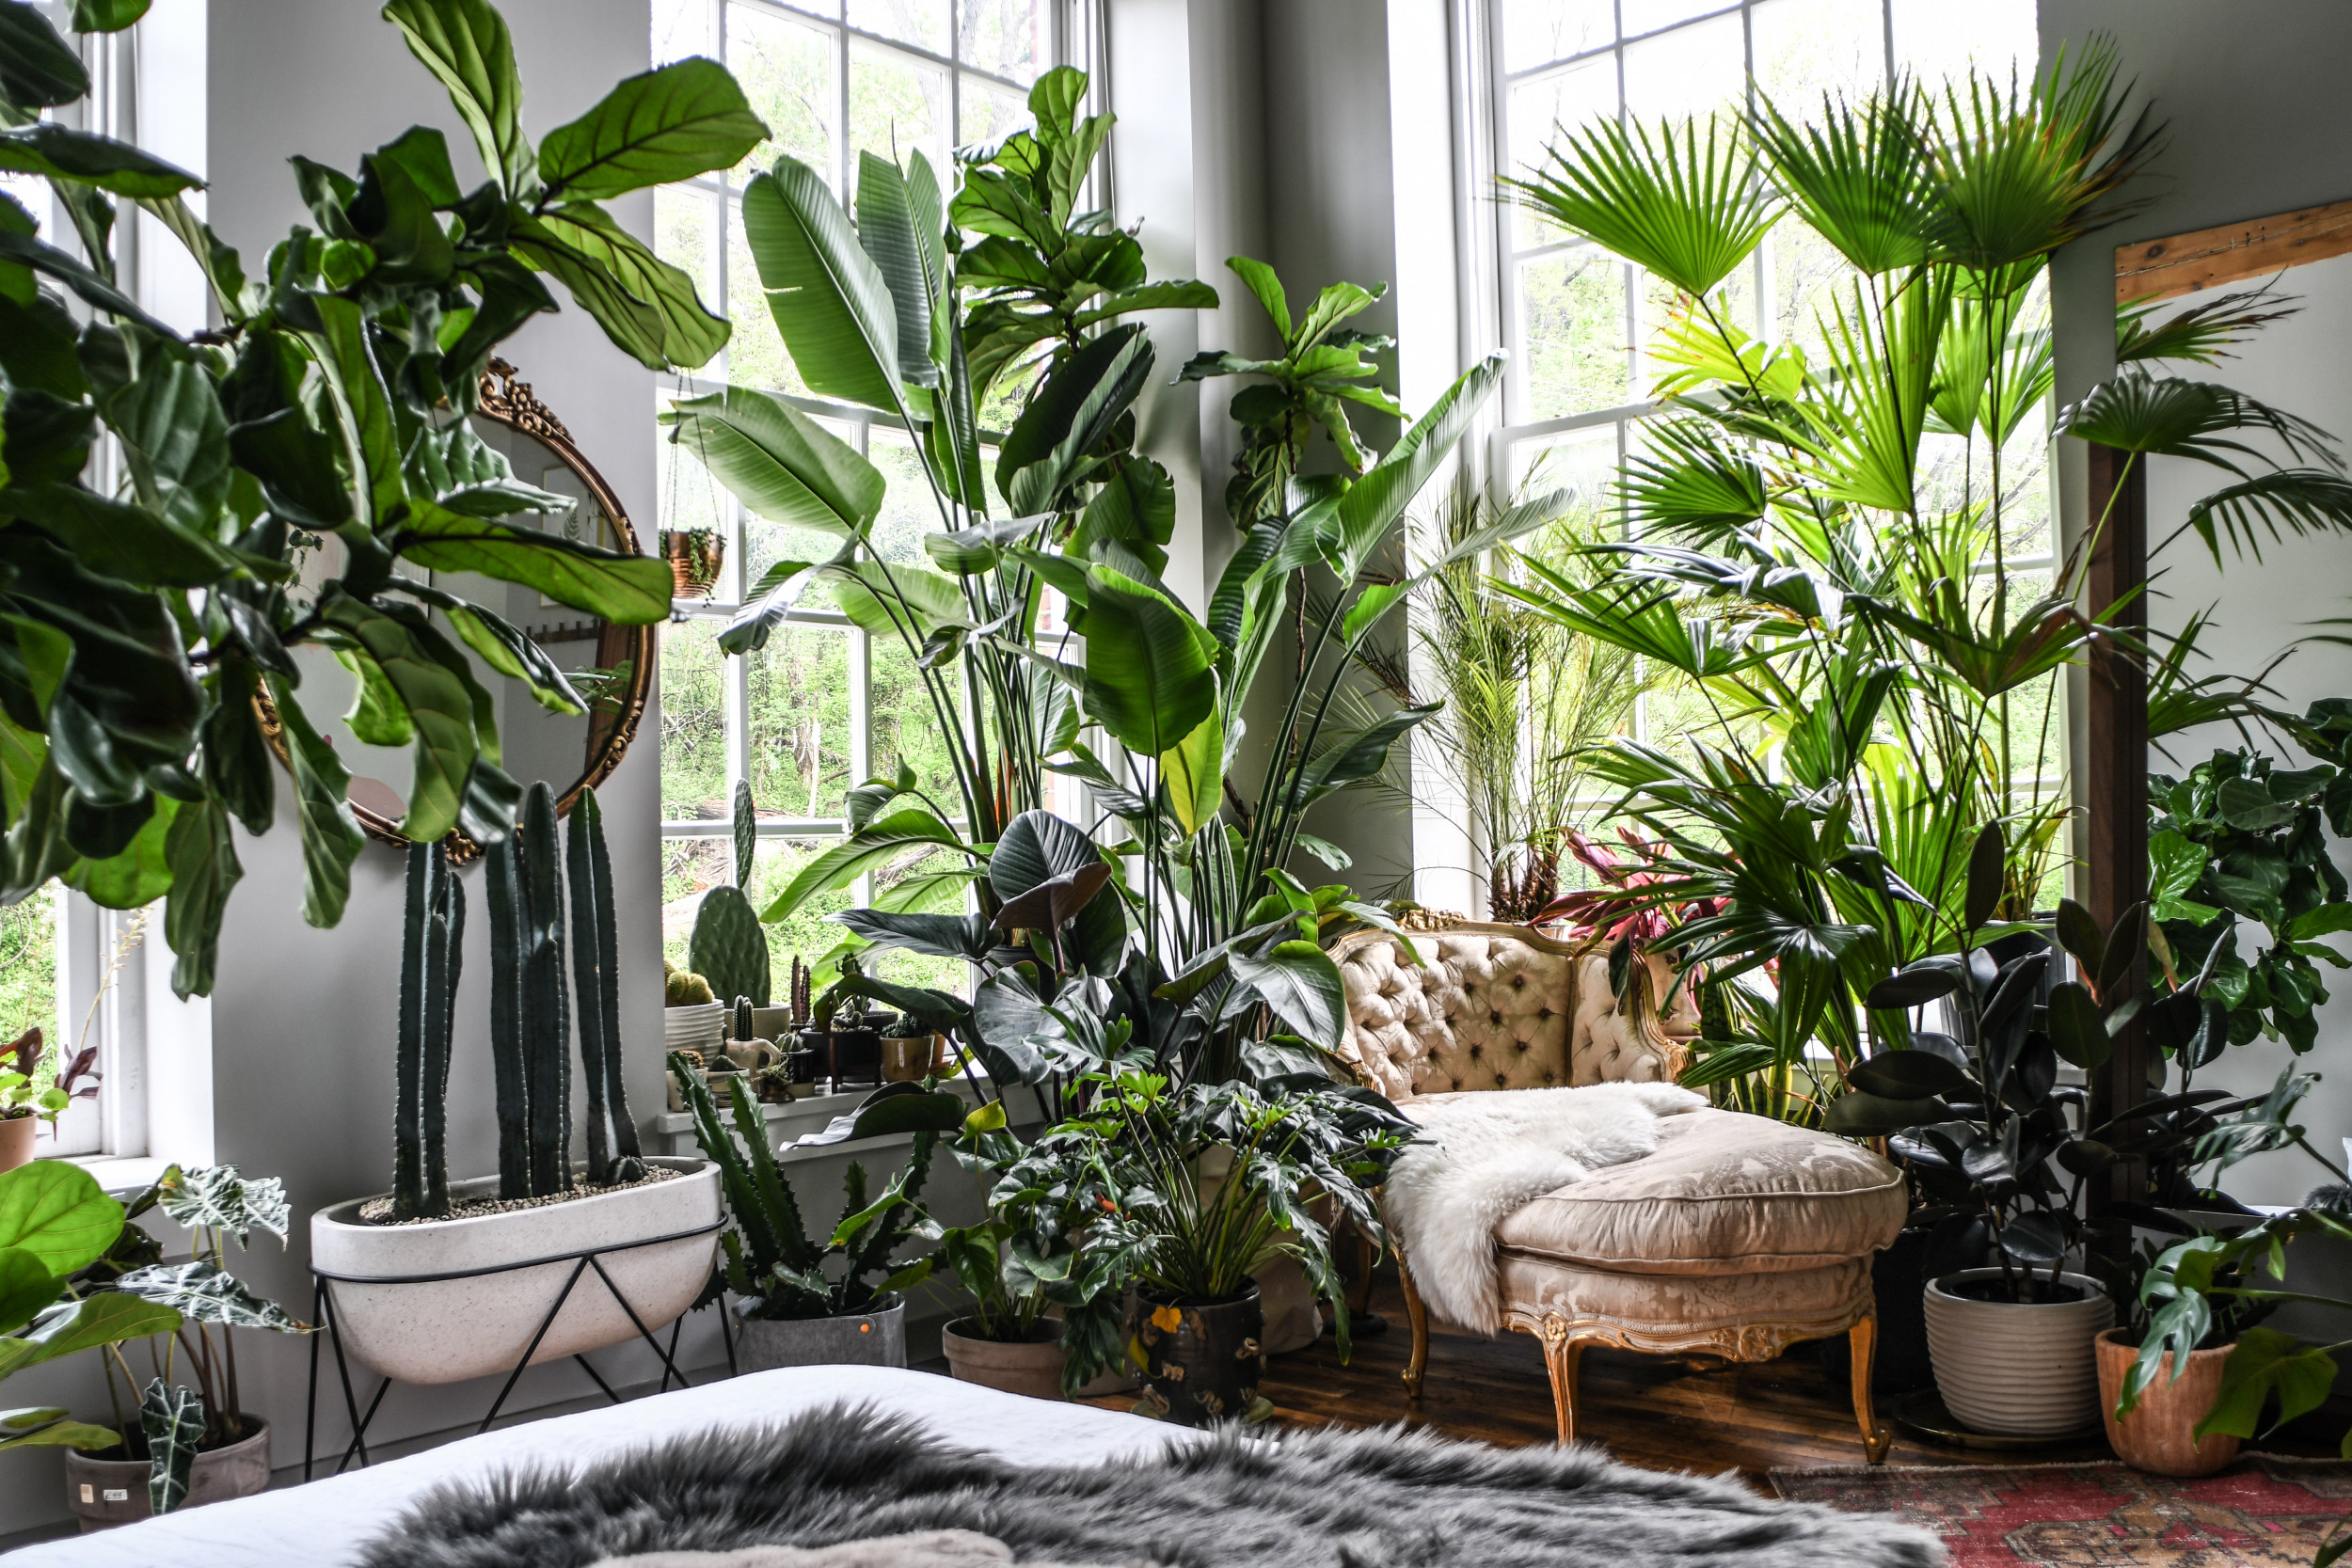 ‘I’m a Plant Stylist. Here Are 4 Tips to Make a More Peaceful Home’